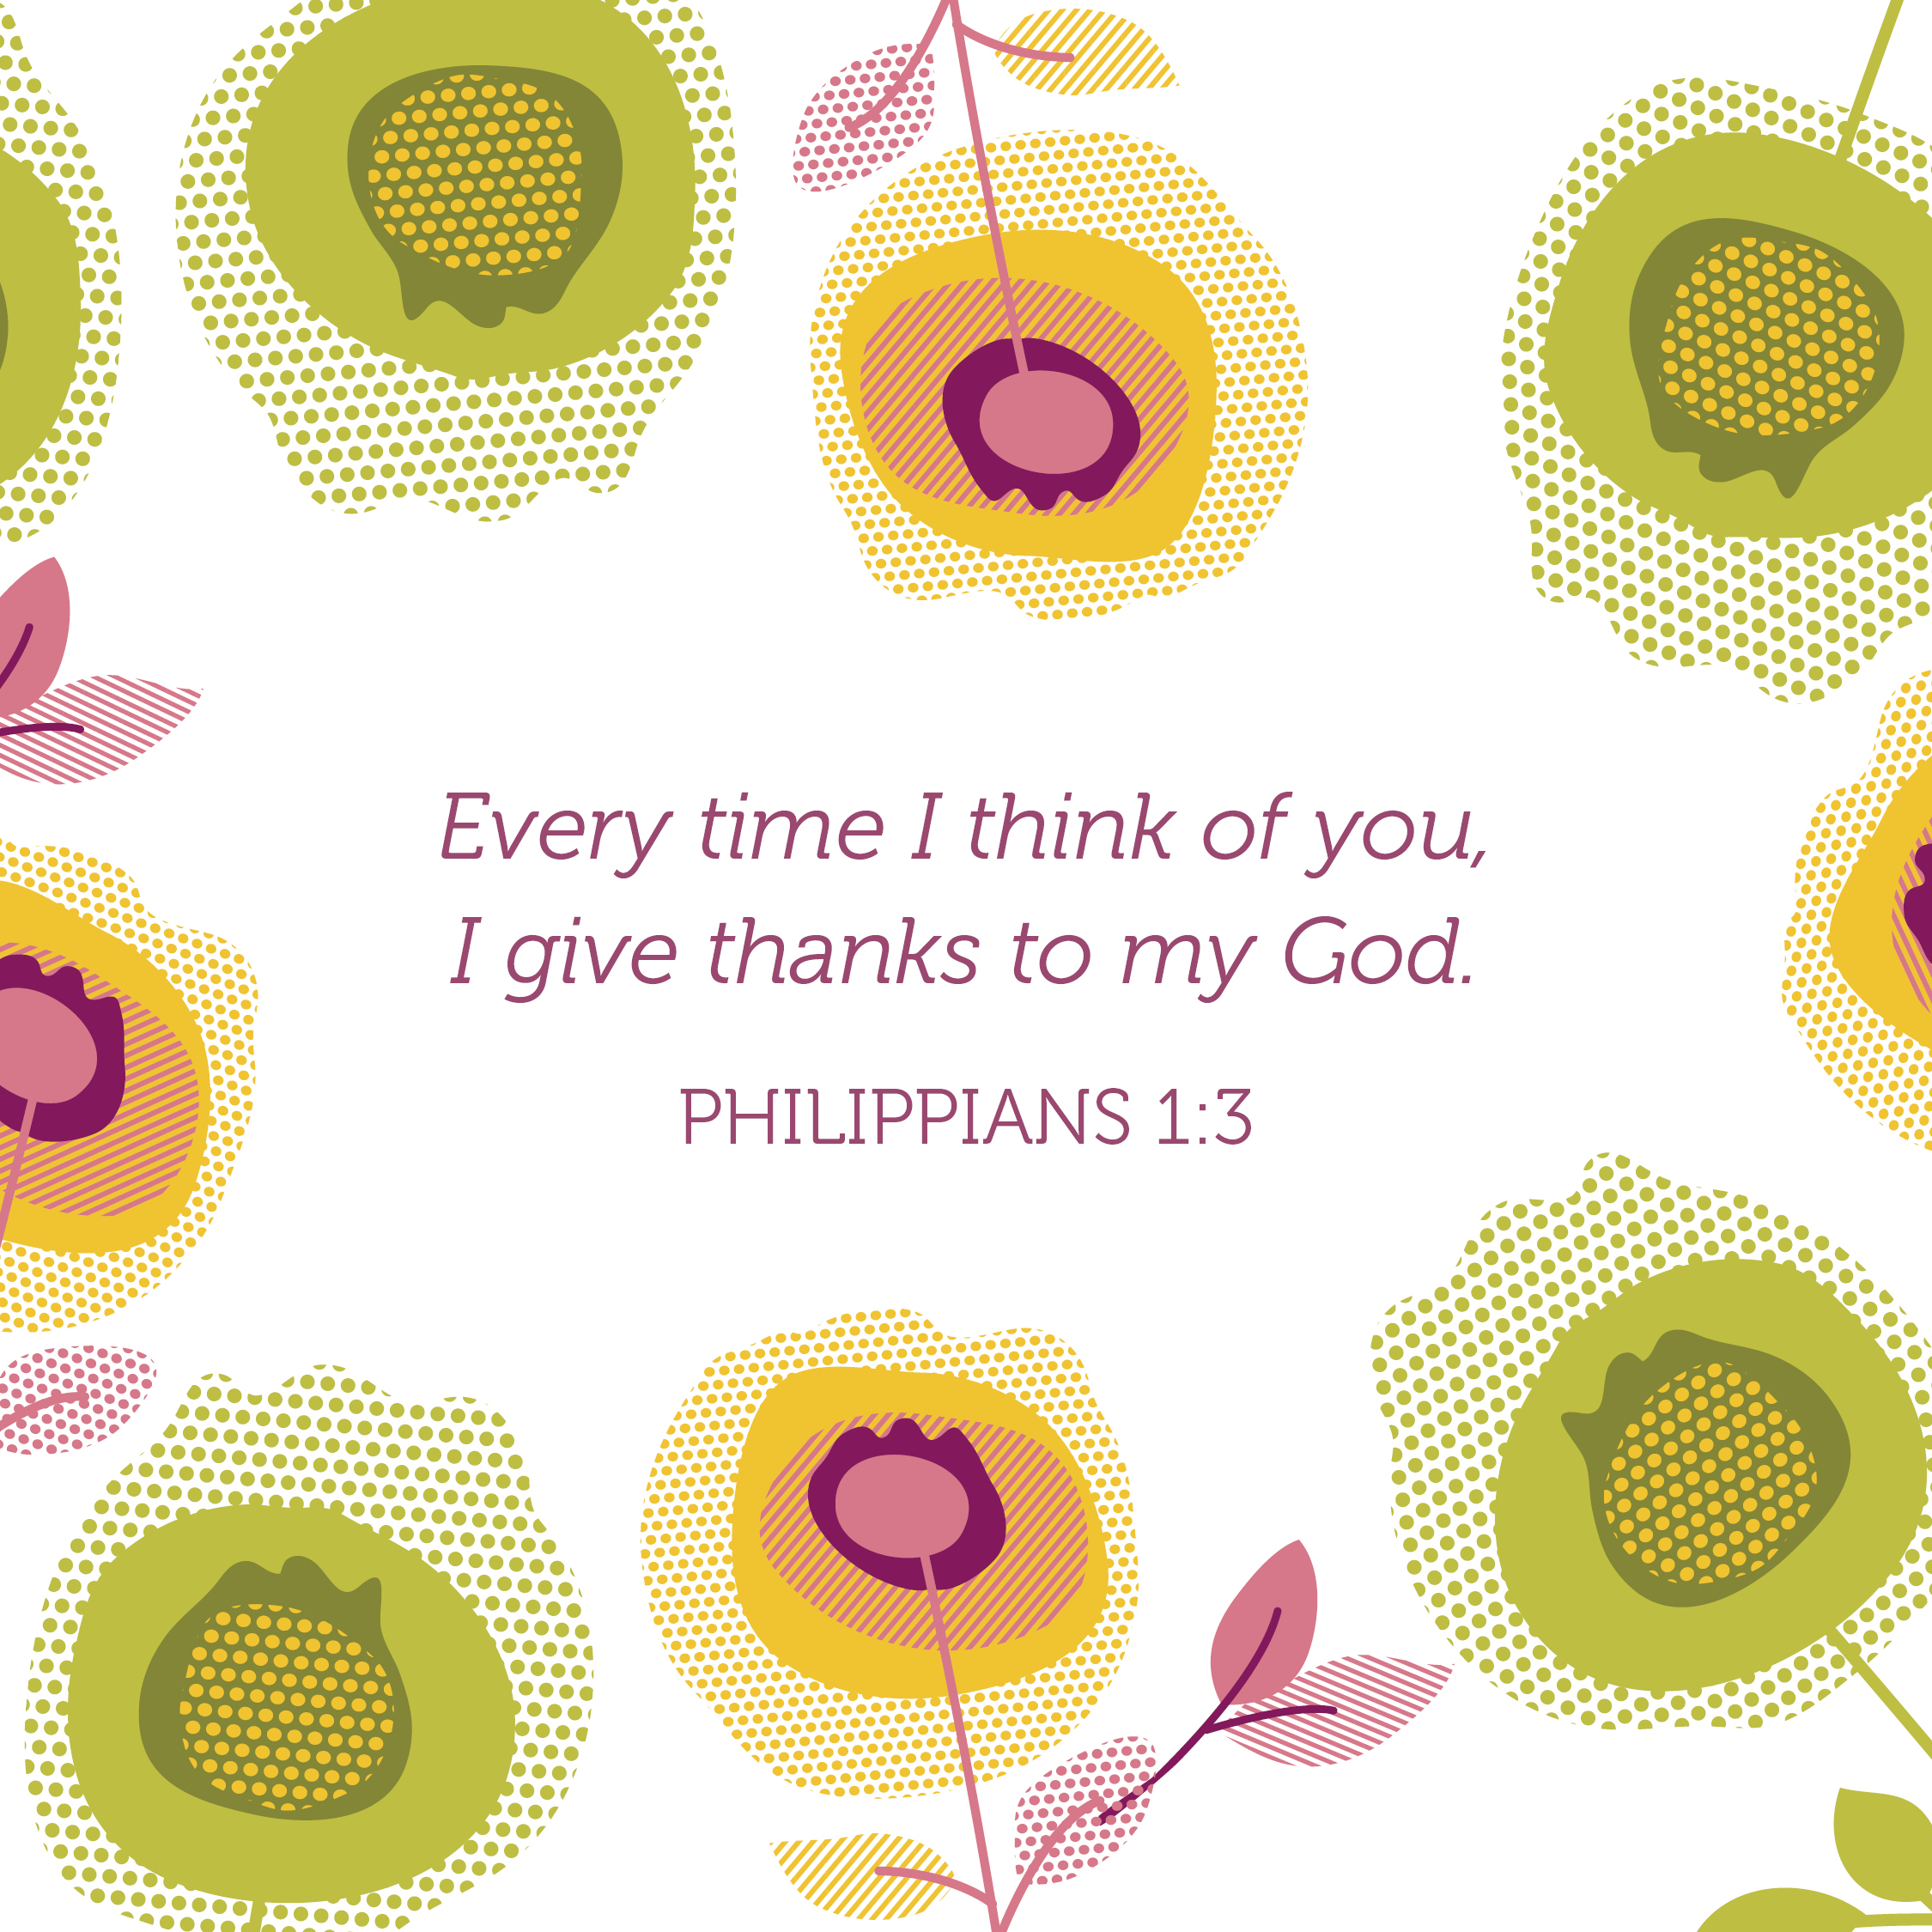 "Every time I think of you, I give thanks to my God." ~ Philippians 1:3, I Love You, Mom! book by Blythe Daniel and Dr. Helen McIntosh